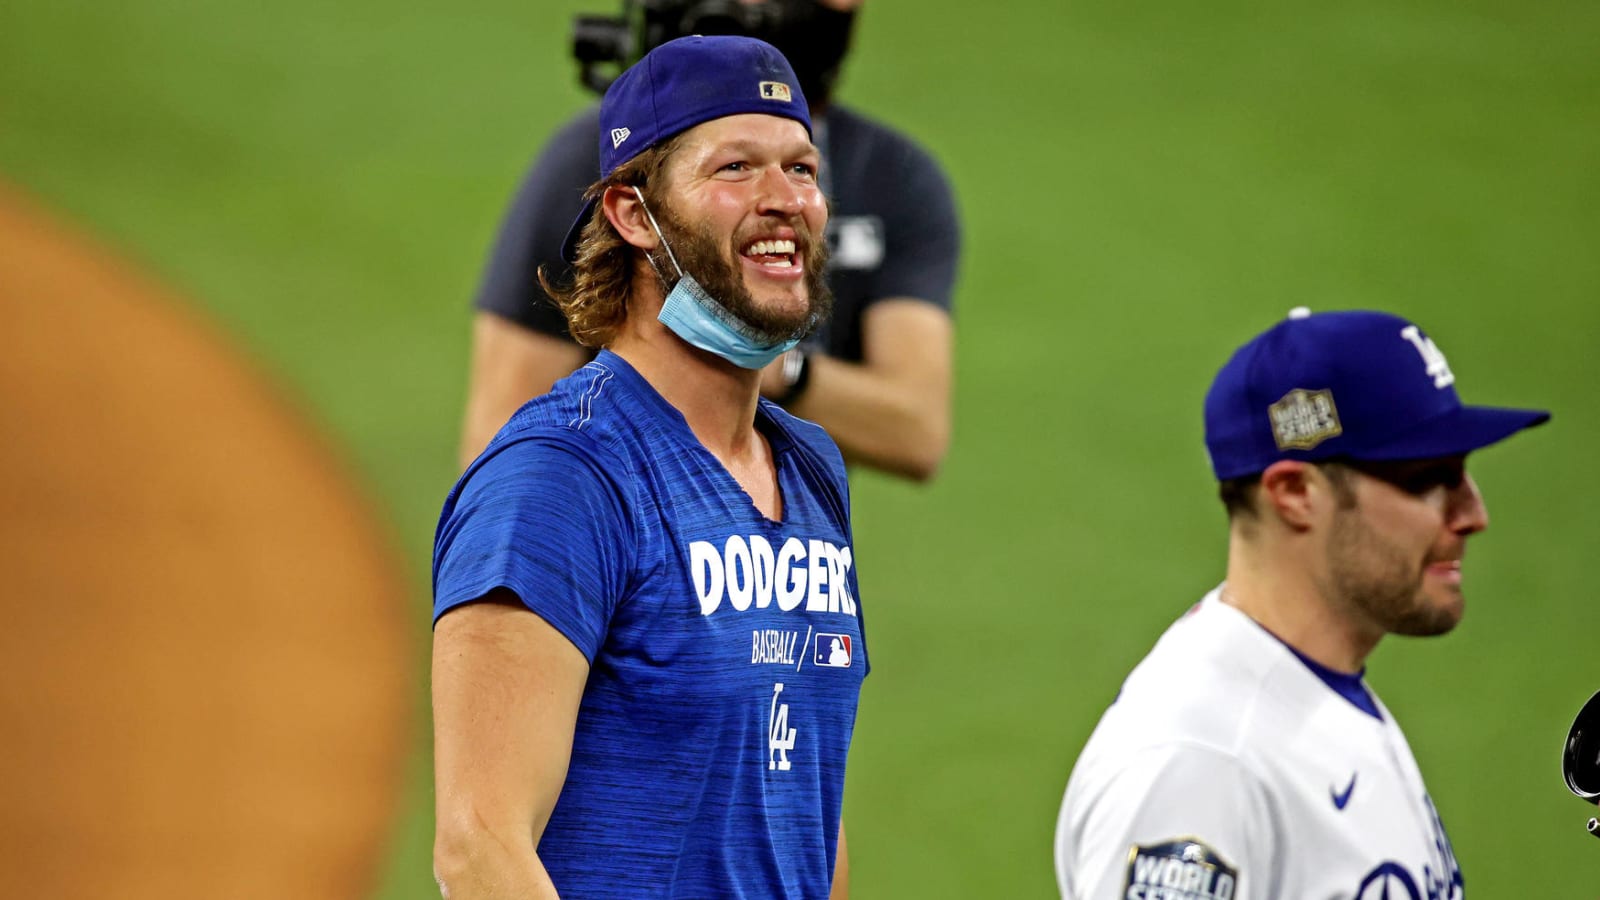 Kershaw unsure of future with Dodgers beyond 2021 season